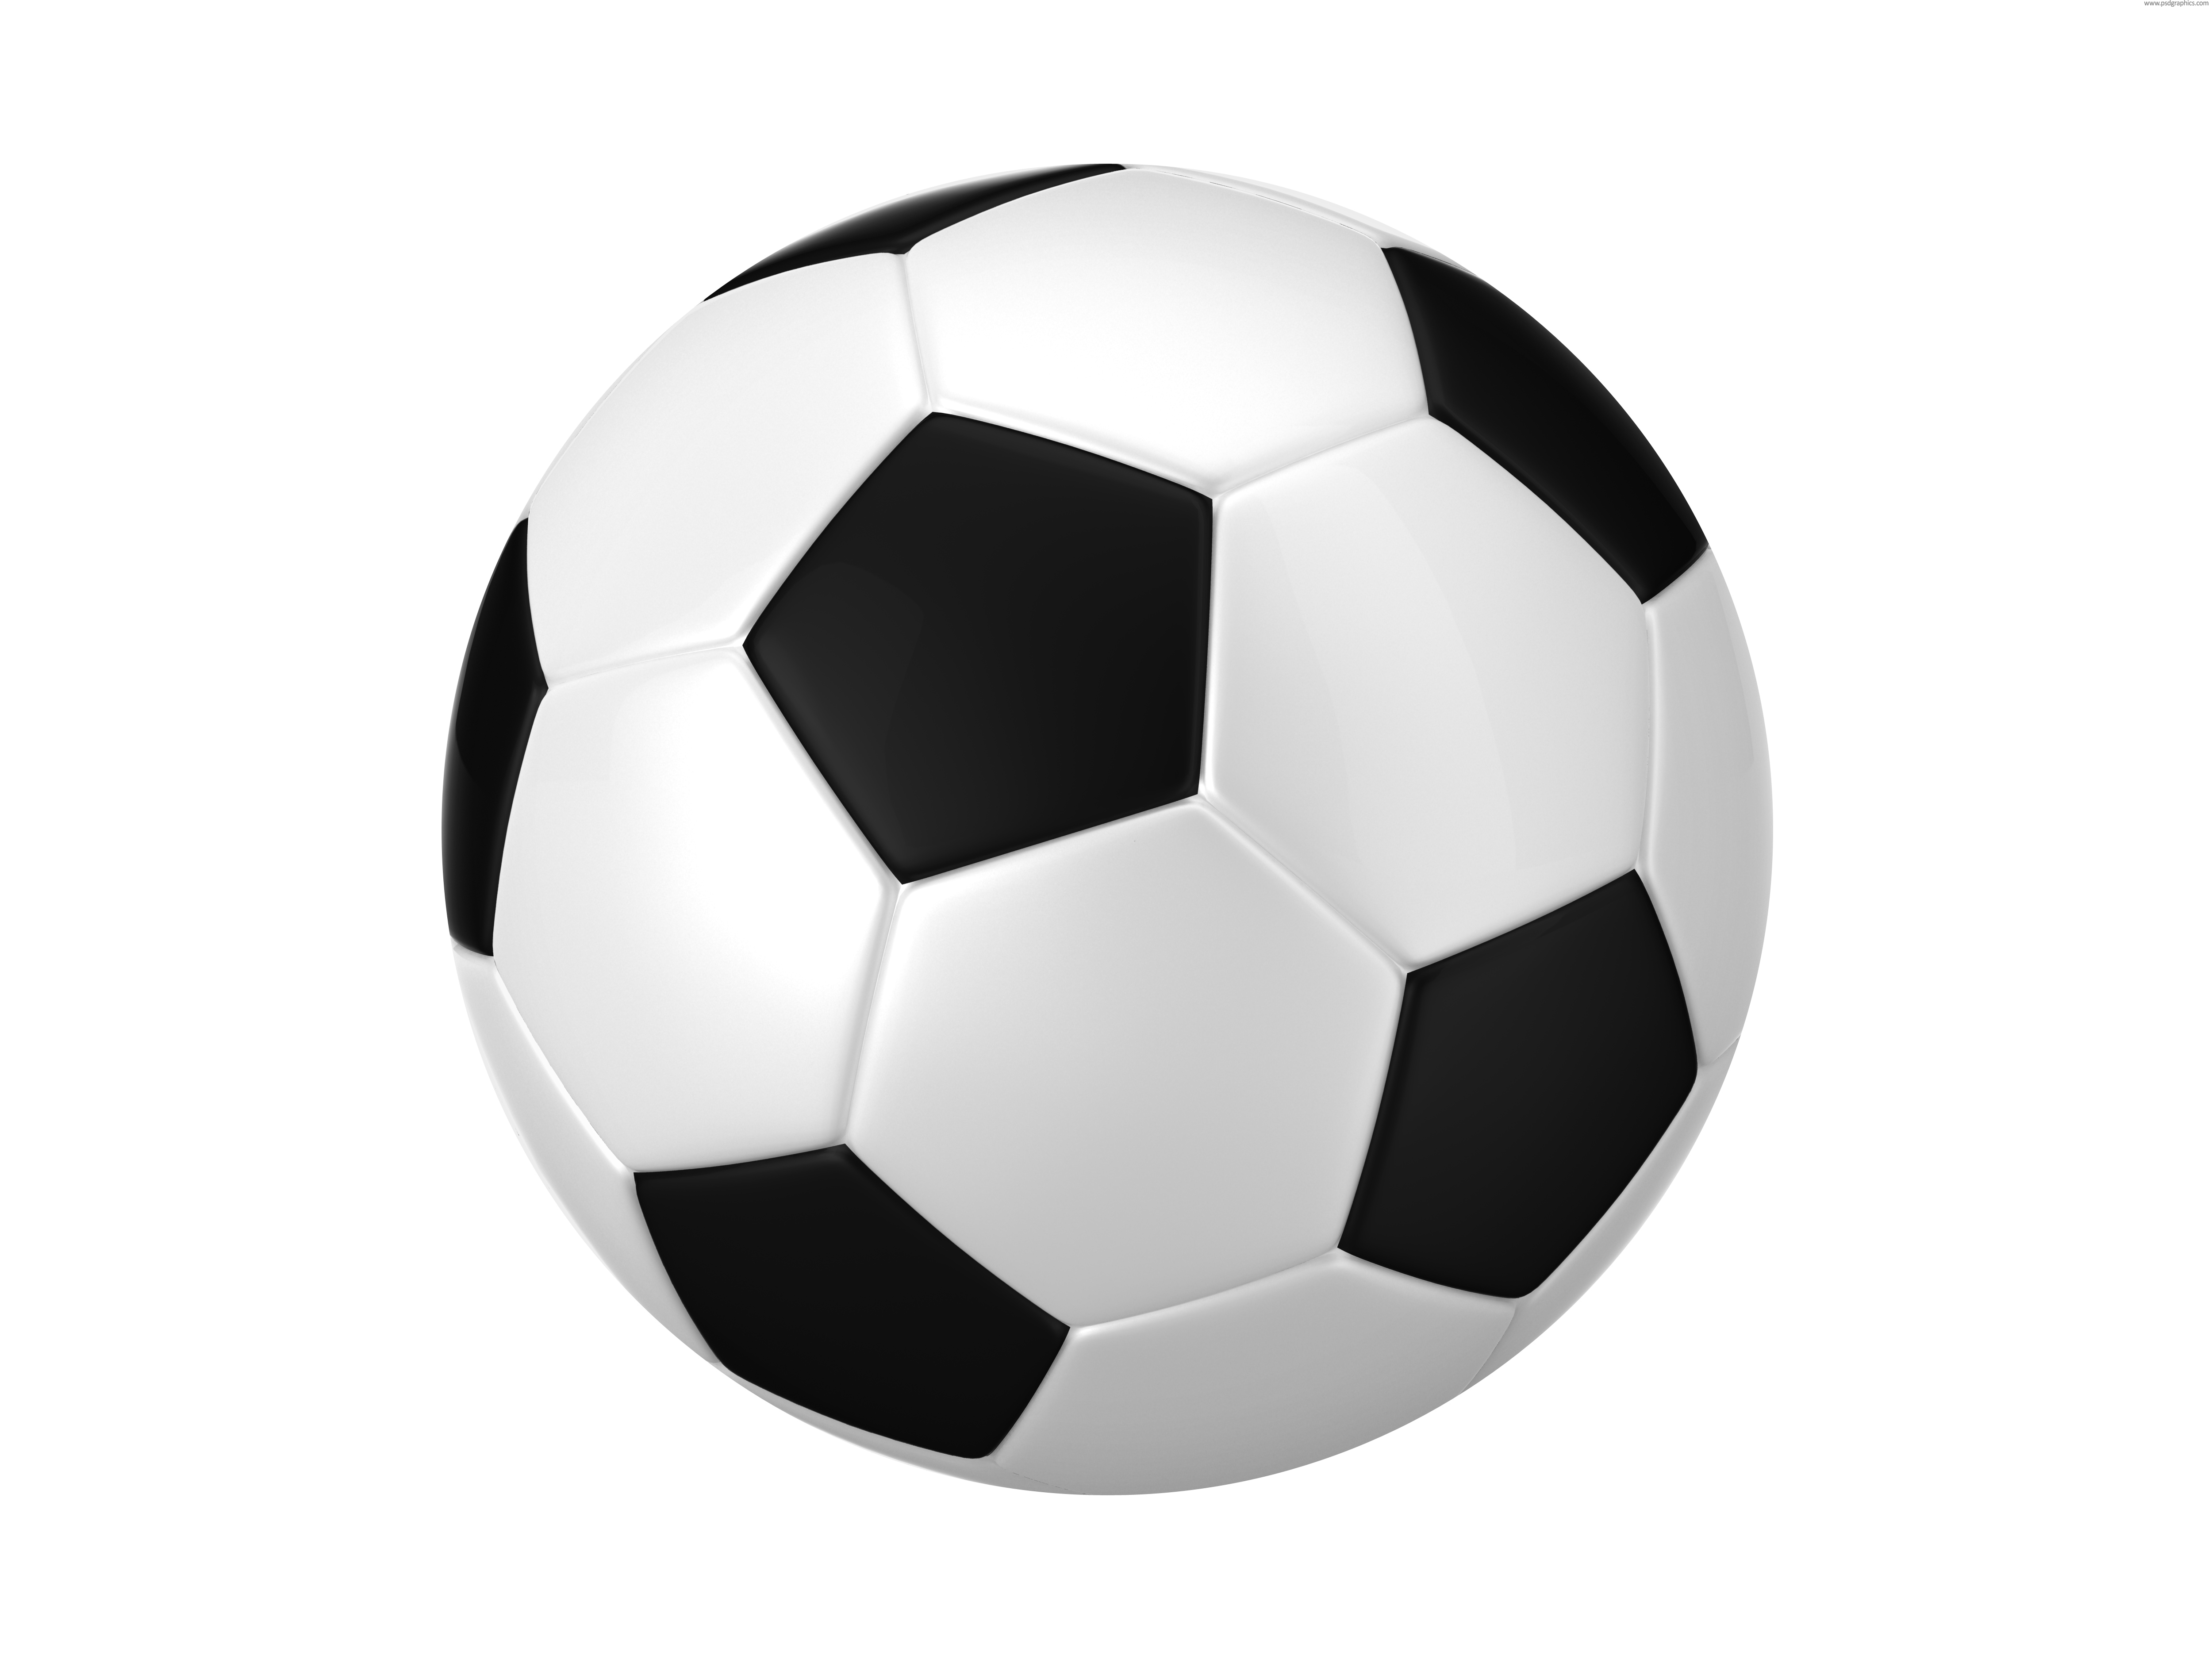 soccer-balls-free-psd-pack-download-yoursourceisopen-clipart